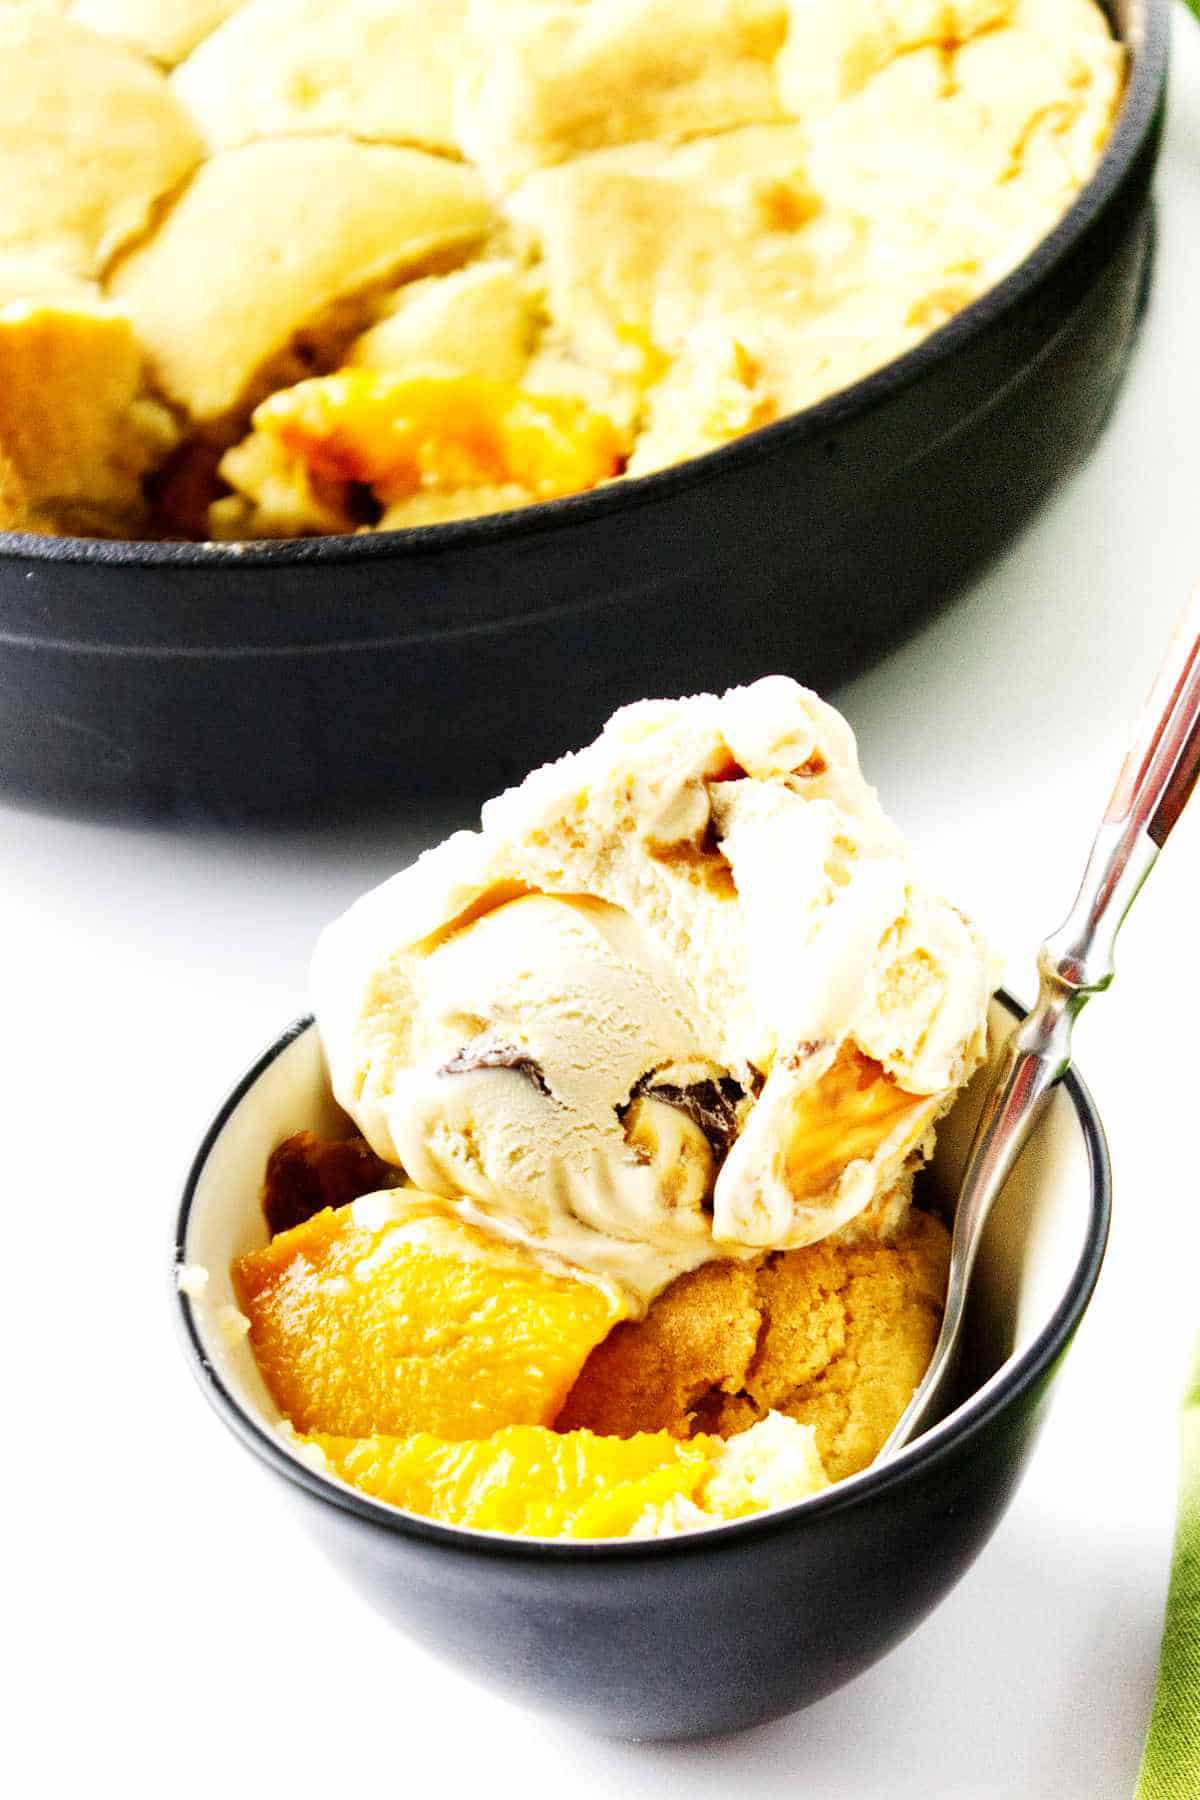 peach cobbler in a bowl with ice cream on top, with cast iron peach cobbler in background.